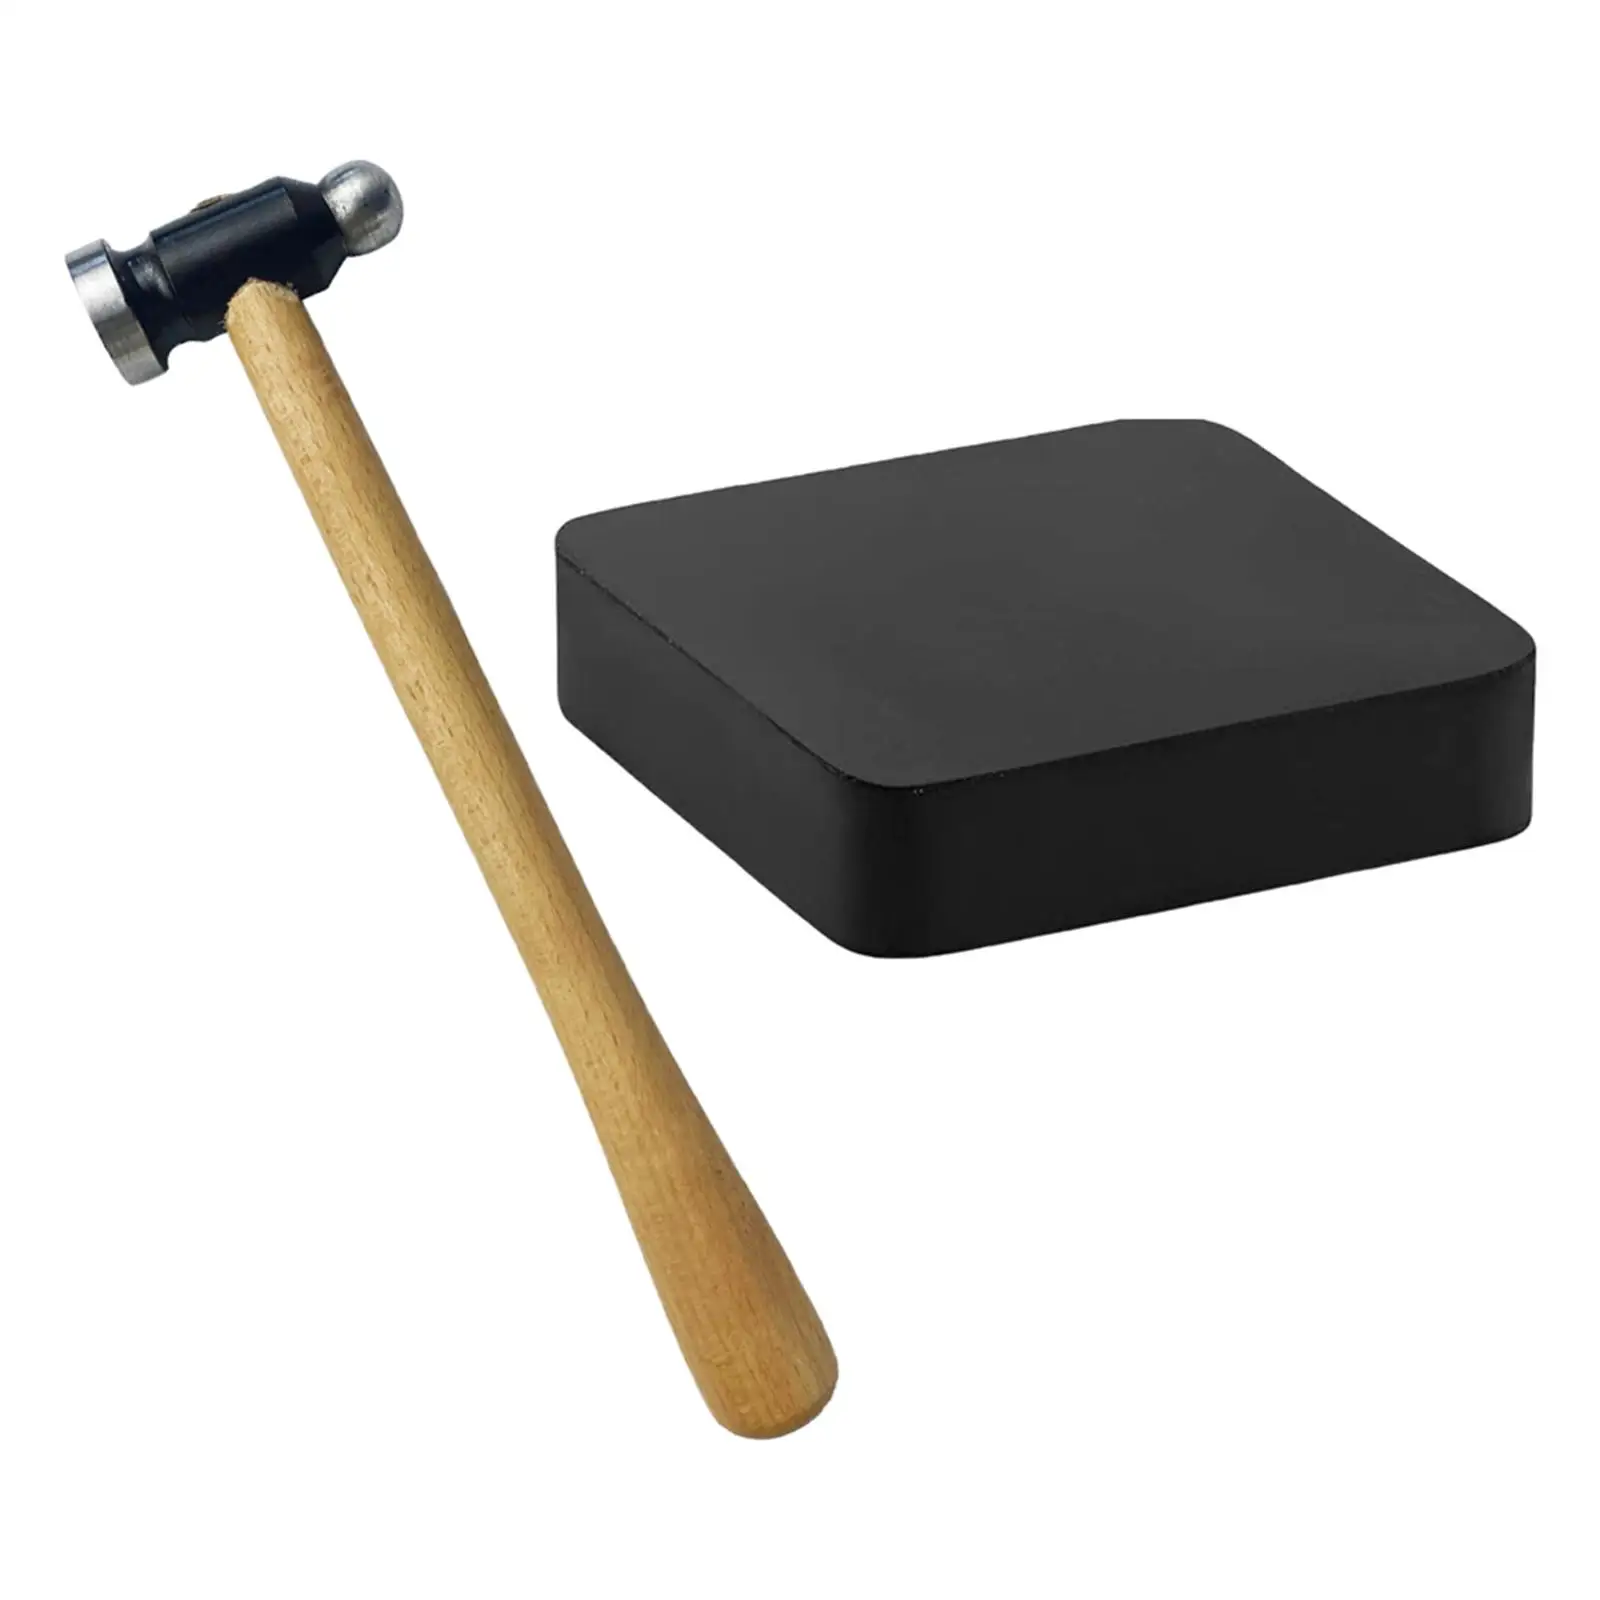 Steel Mallet with Rubber Bench Block for Hammering Metal Dapping Jewelry Making Crafts